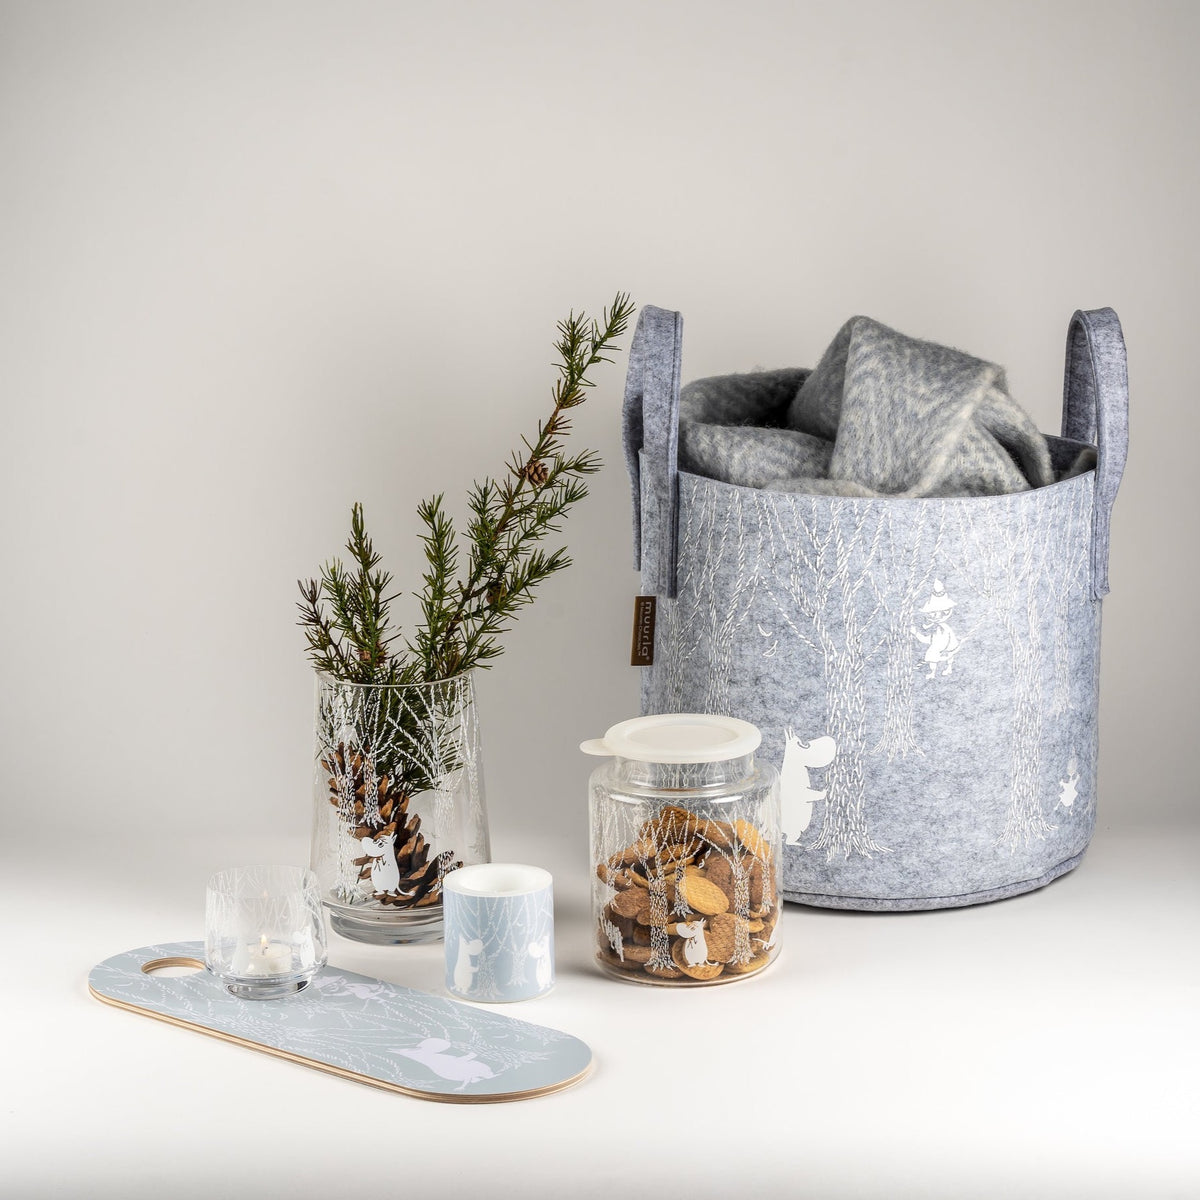 A selection of Moomin In The Woods products by Muurla Design